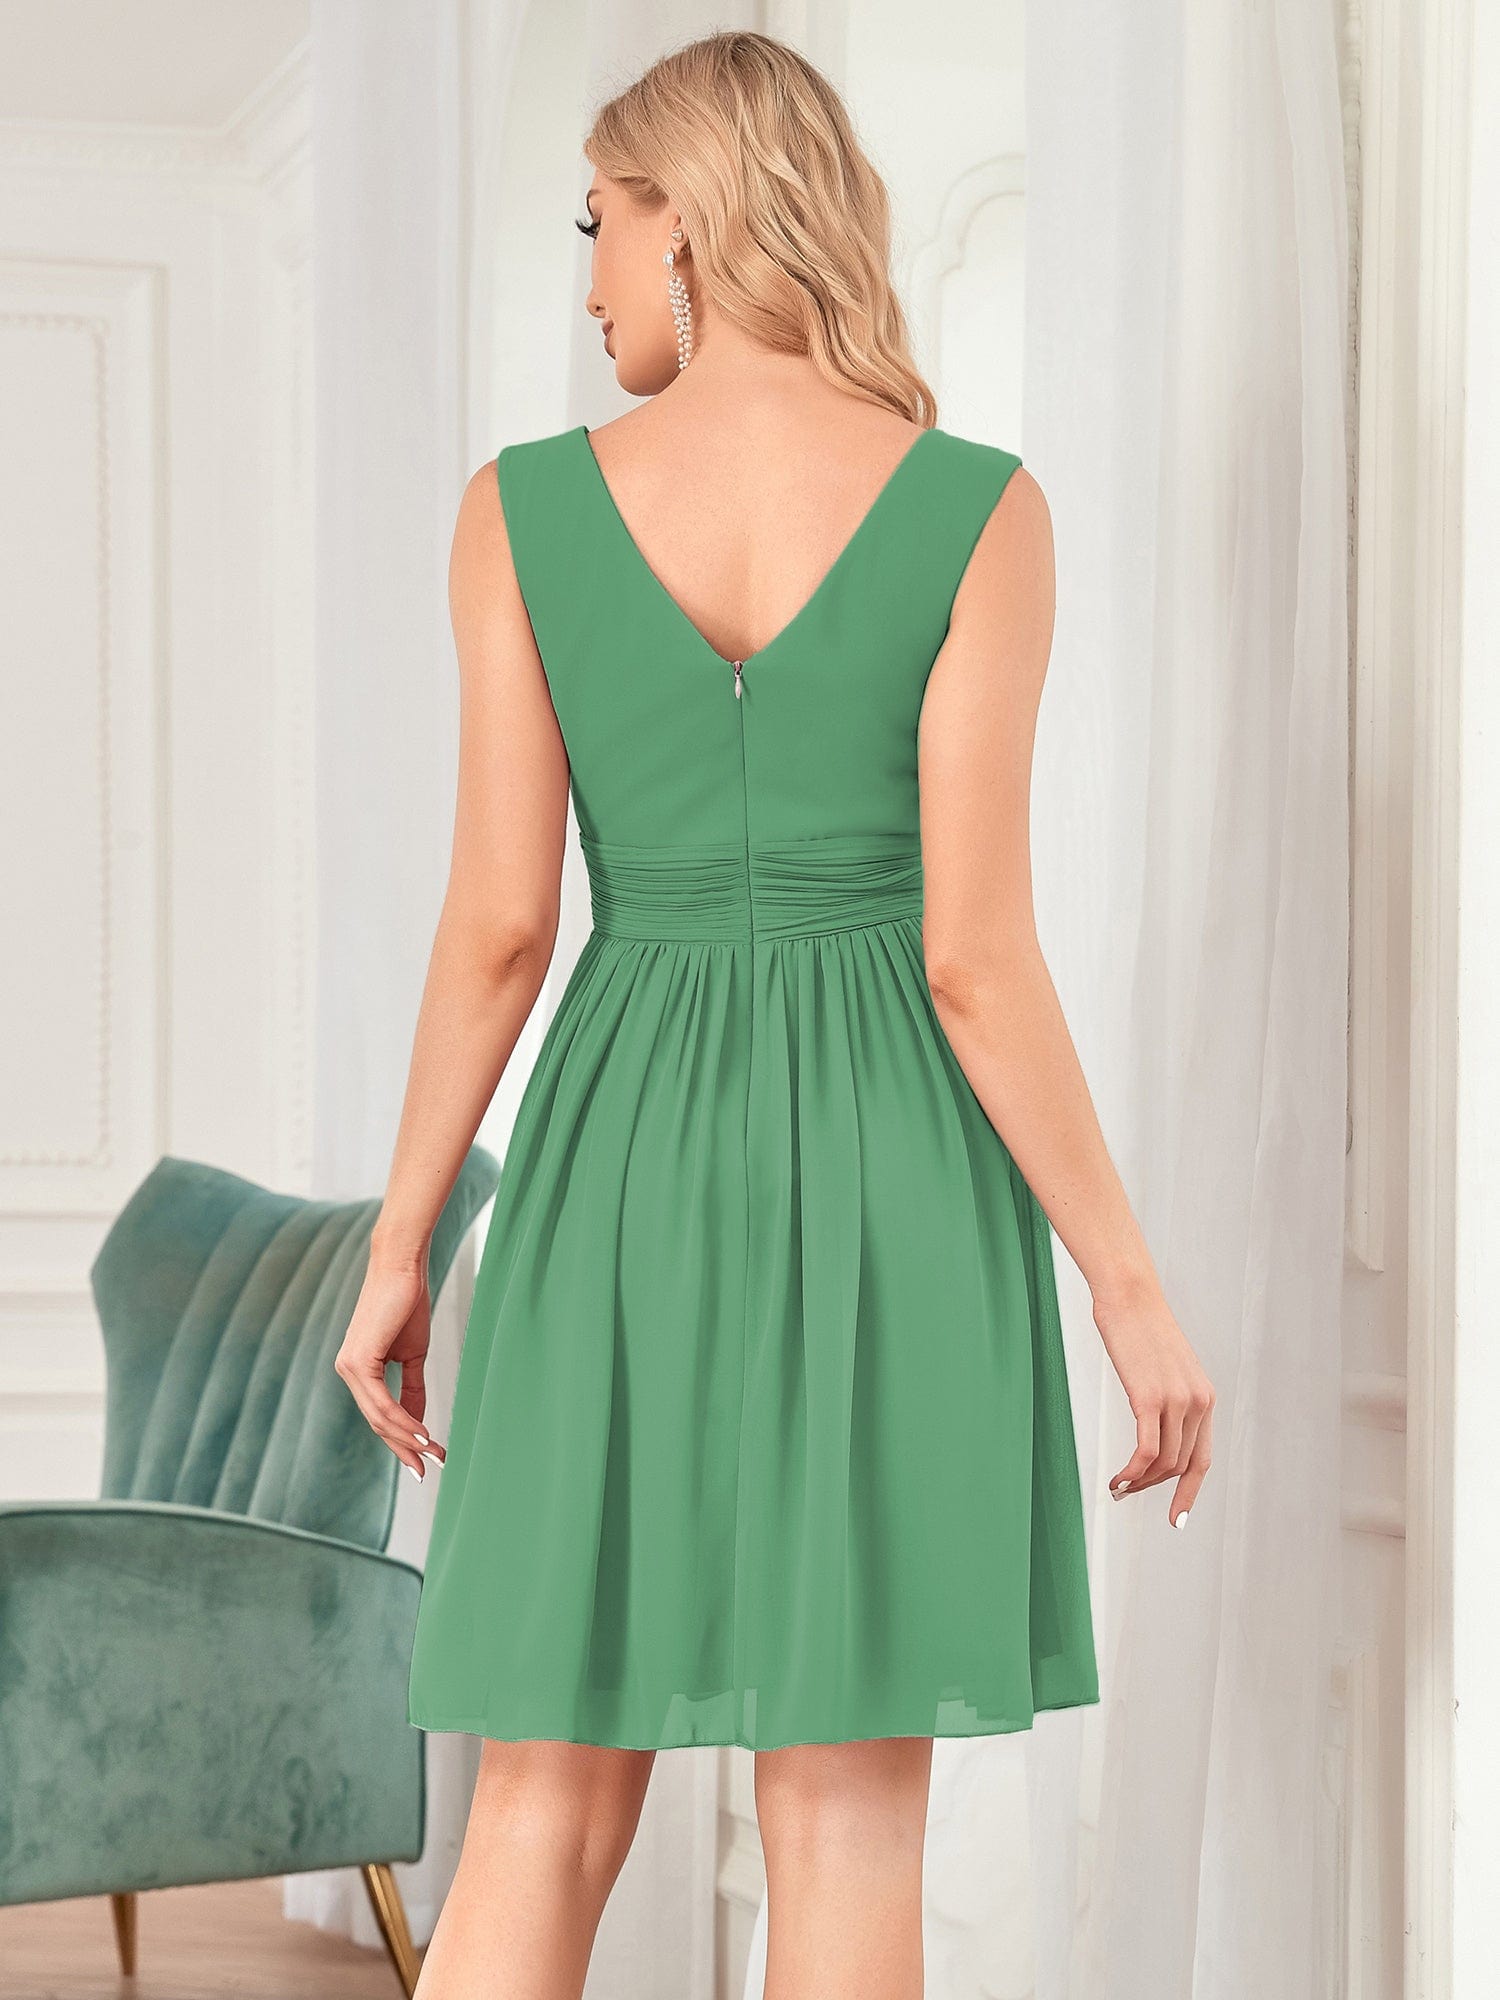 Chic Custom Womens Bridesmaid Blazer Set Green Corset Bodysuit Jacket And  Shorts Party Gowns For Fashionable Outerwear From Penomise, $87.56